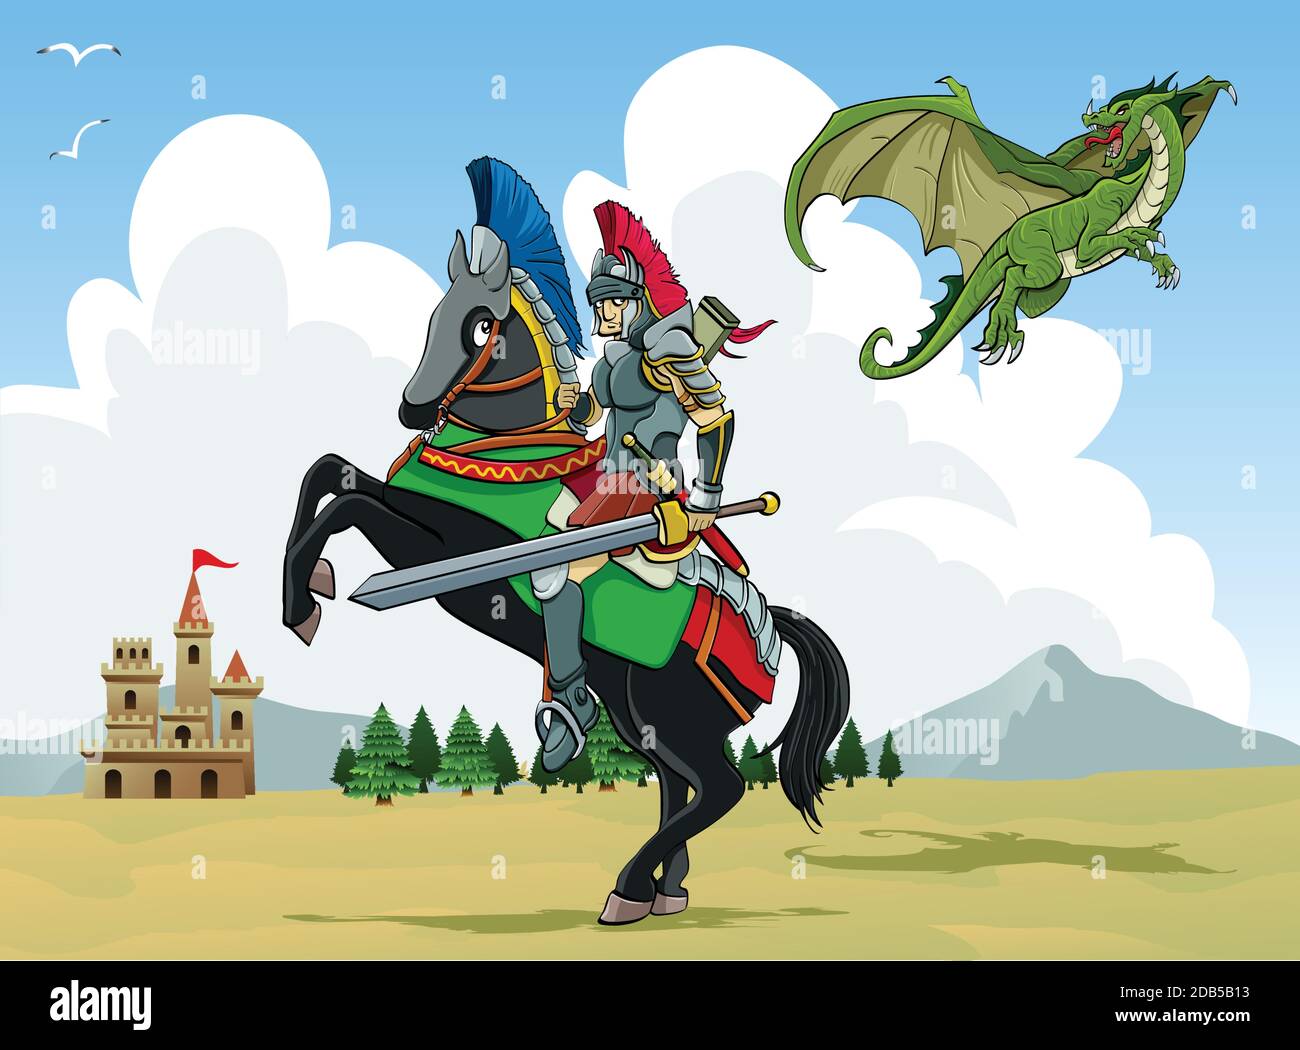 Cartoon illustration: A flying dragon threatens a sword-wielding knight. Trees and ancient castle on the background Stock Vector